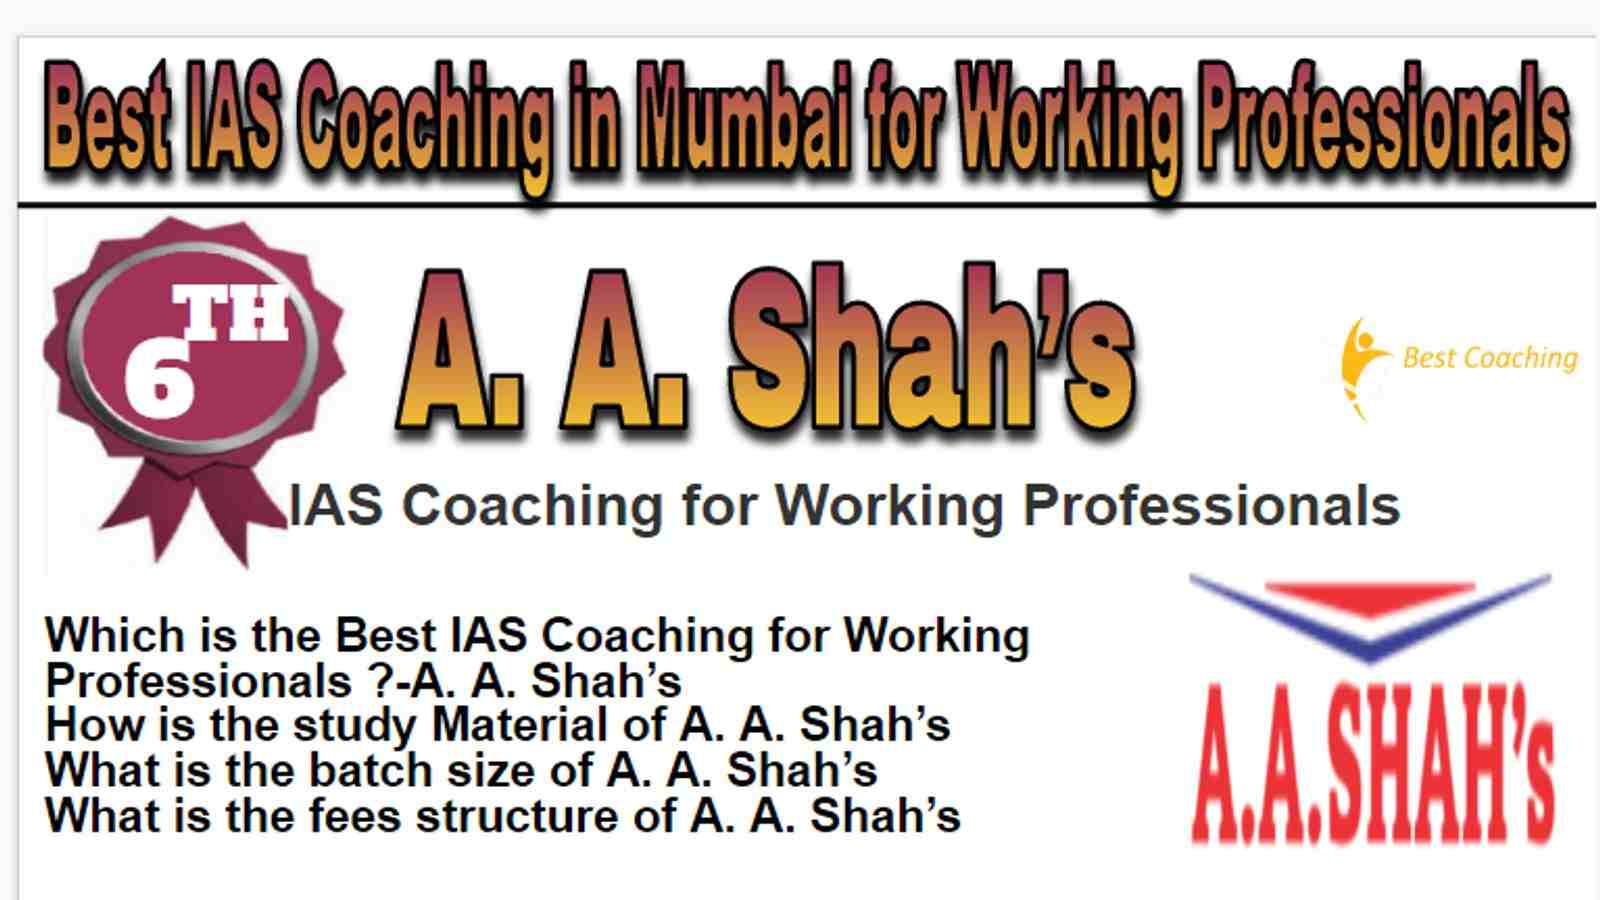 Rank 6 Best IAS Coaching in Mumbai for Working Professionals